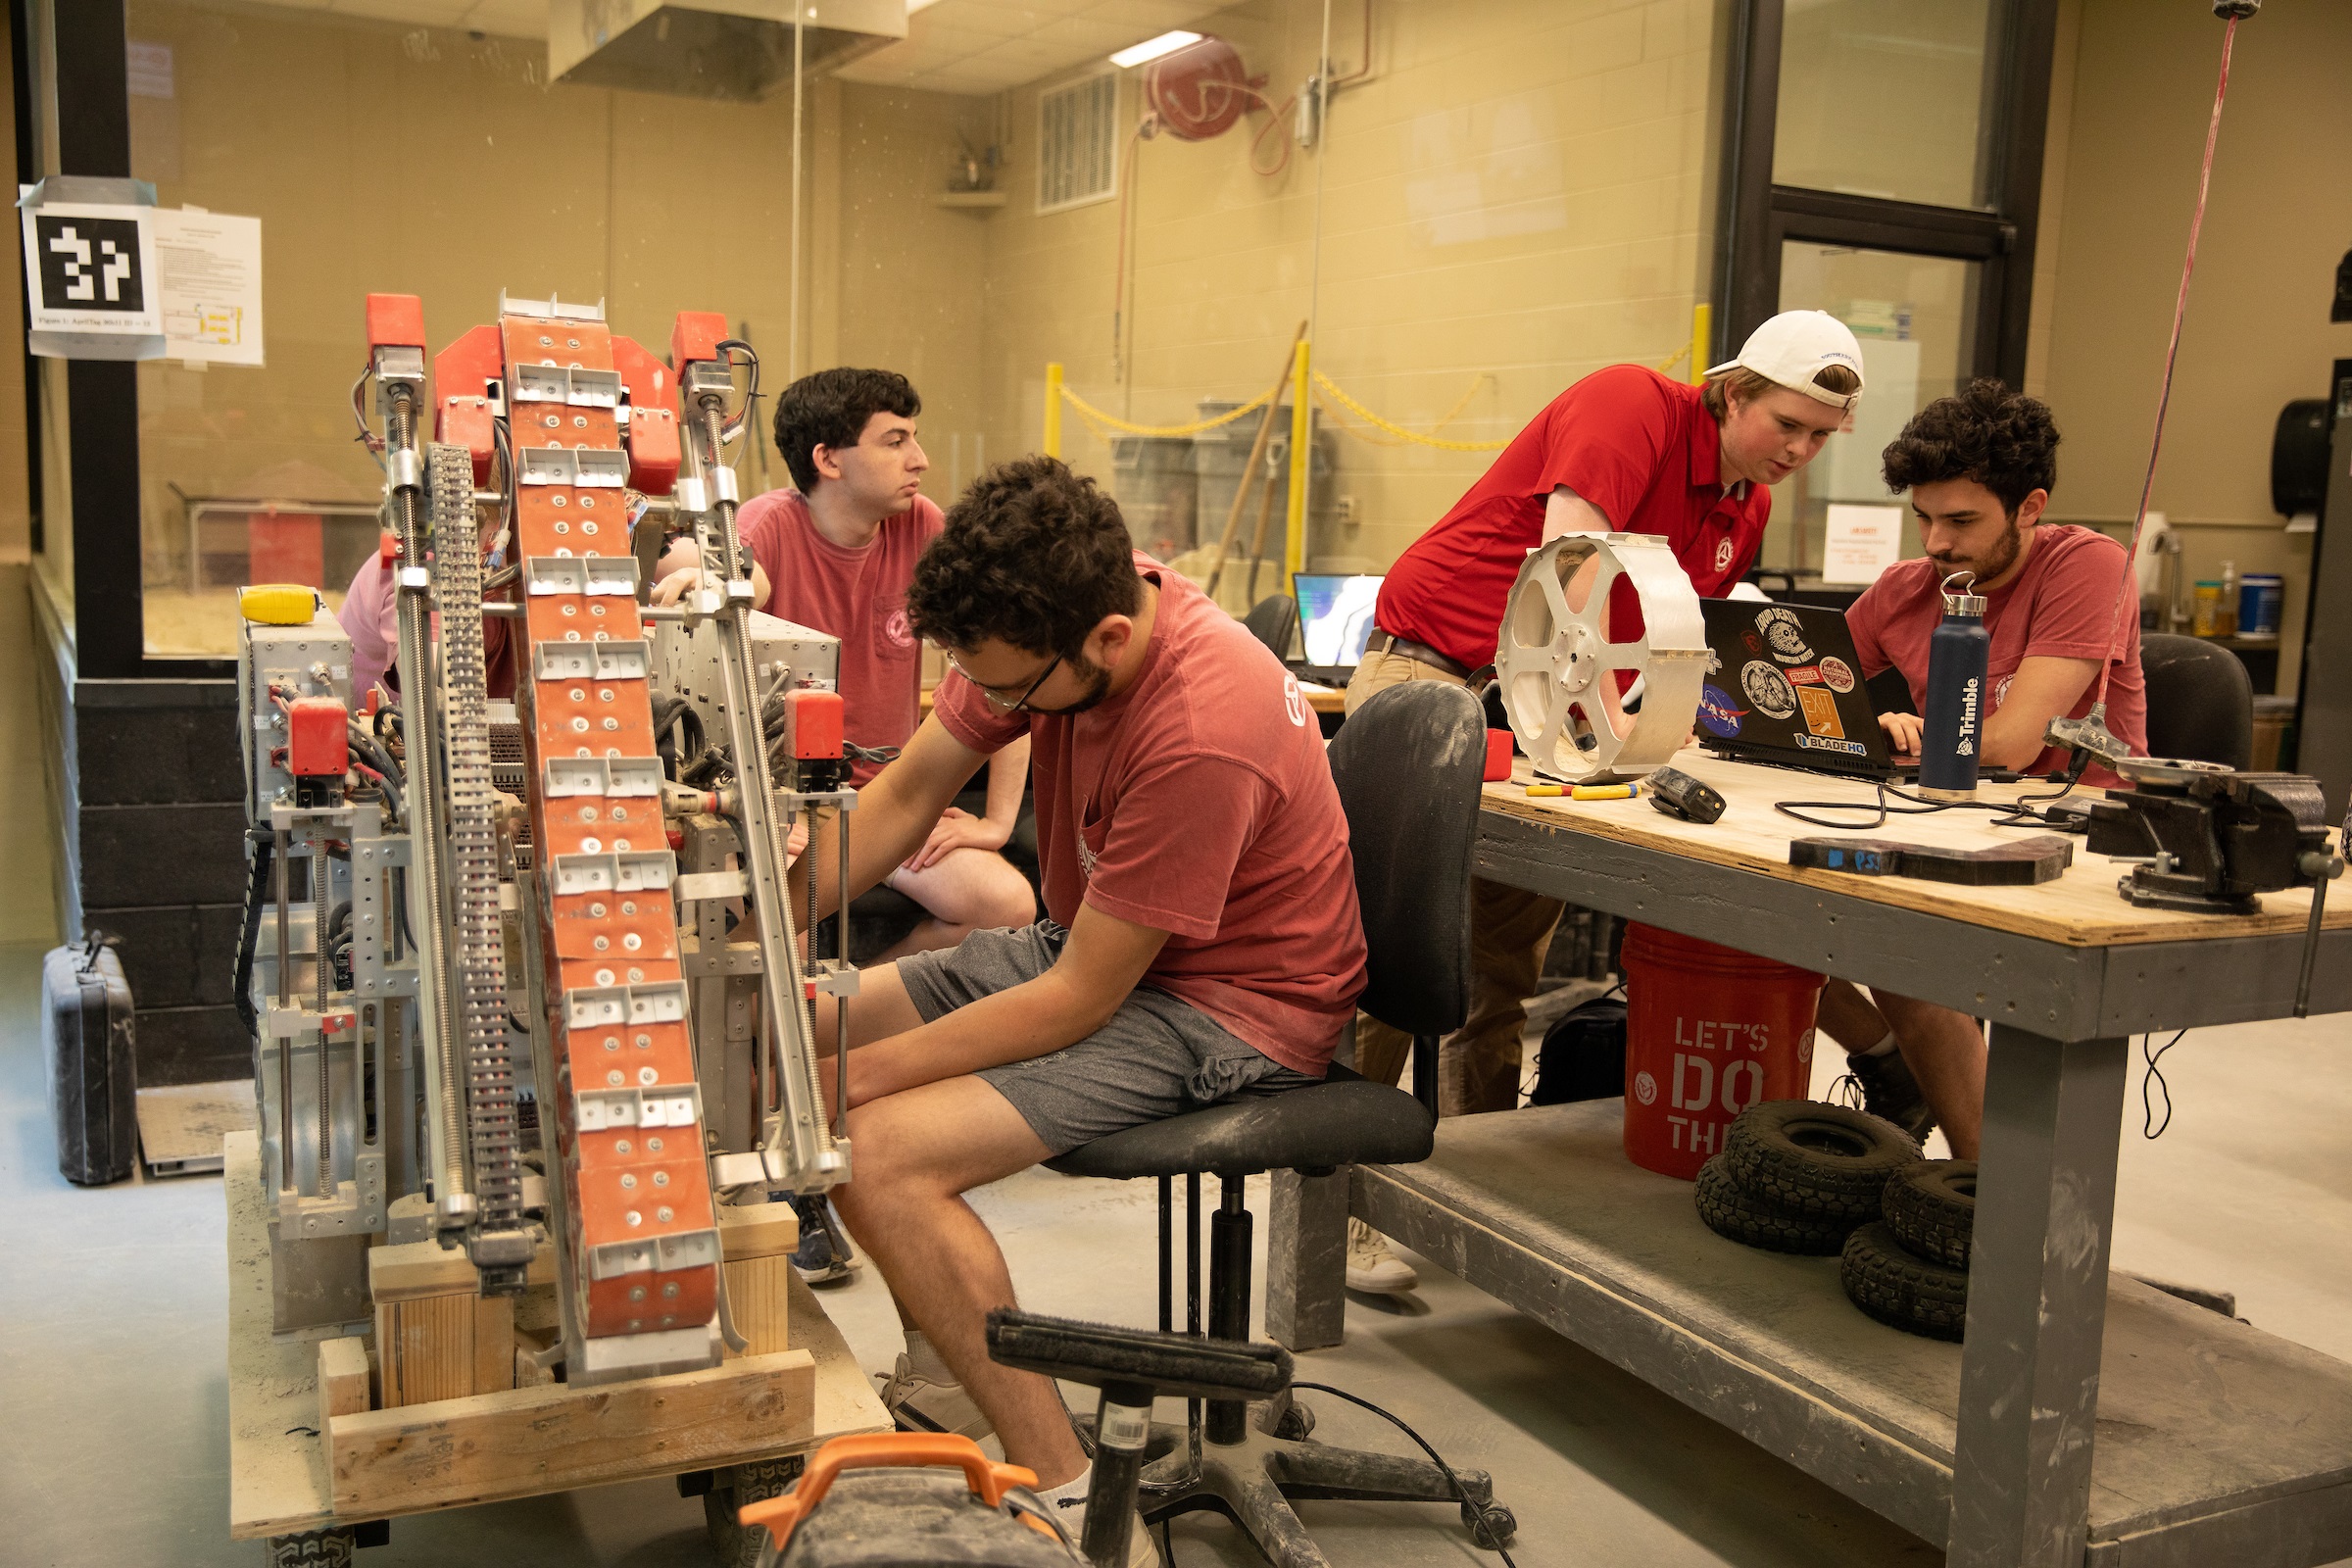 Students at The University of Alabama work in a robotics lab.